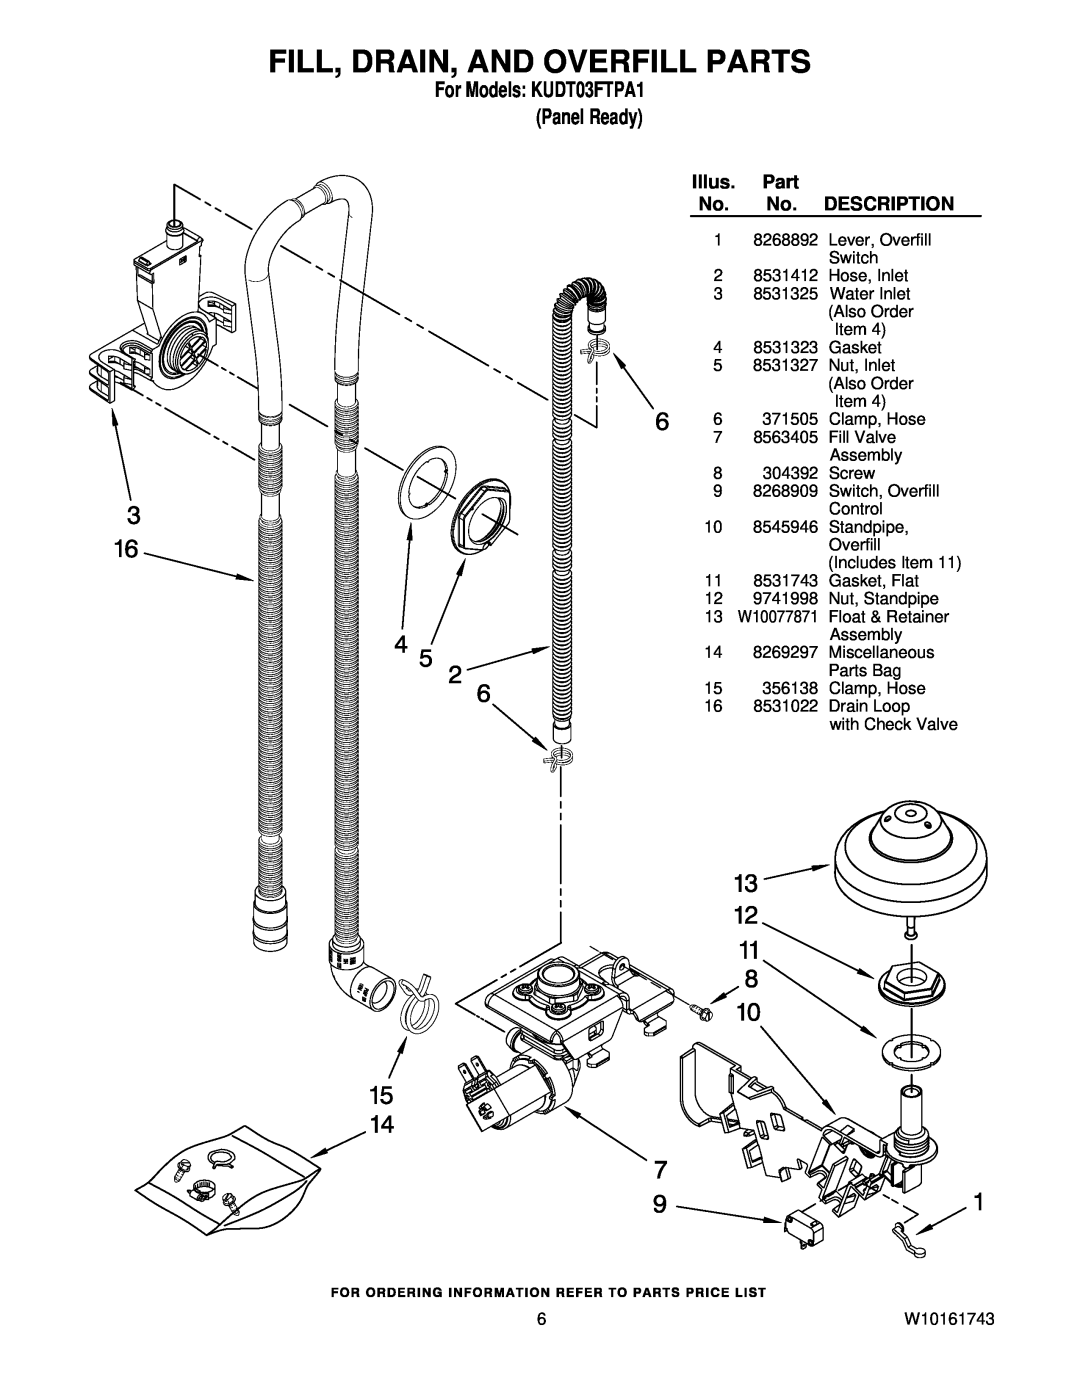 KitchenAid manual Fill, Drain, And Overfill Parts, For Models KUDT03FTPA1 Panel Ready, Illus, Description 